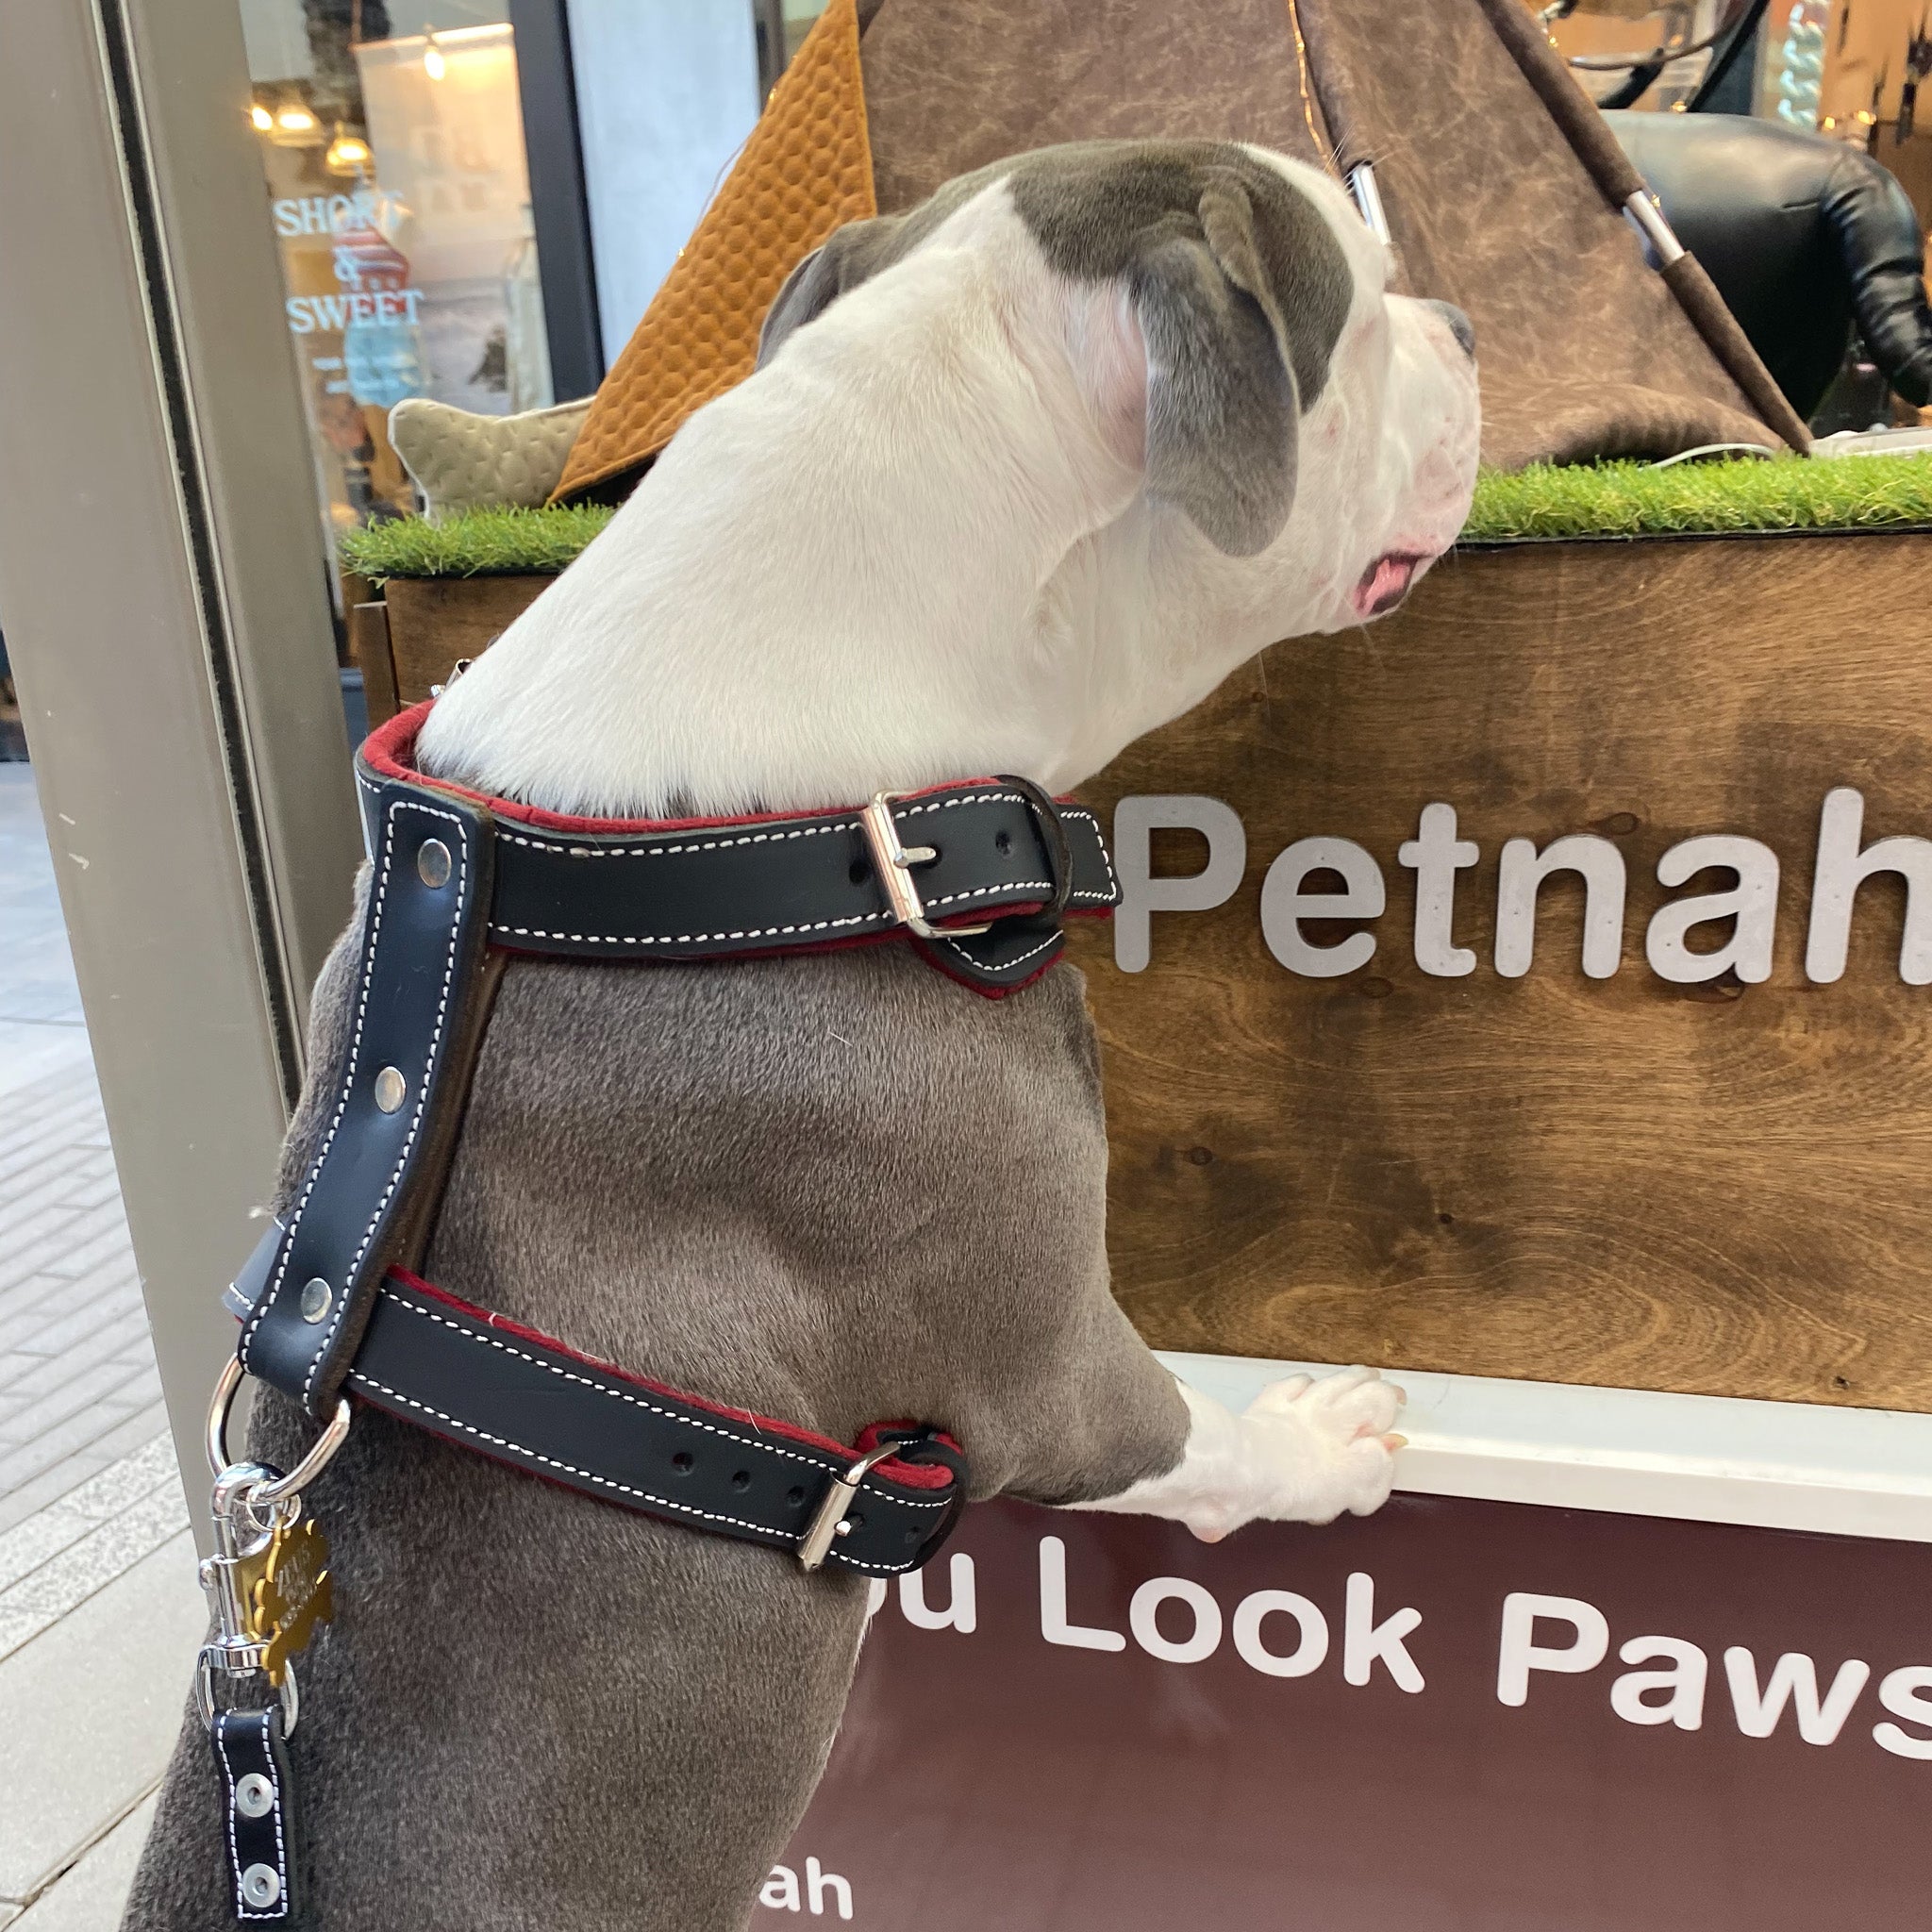 10 Reasons Why a Leather Dog Harness is the Perfect Choice for Your Pup